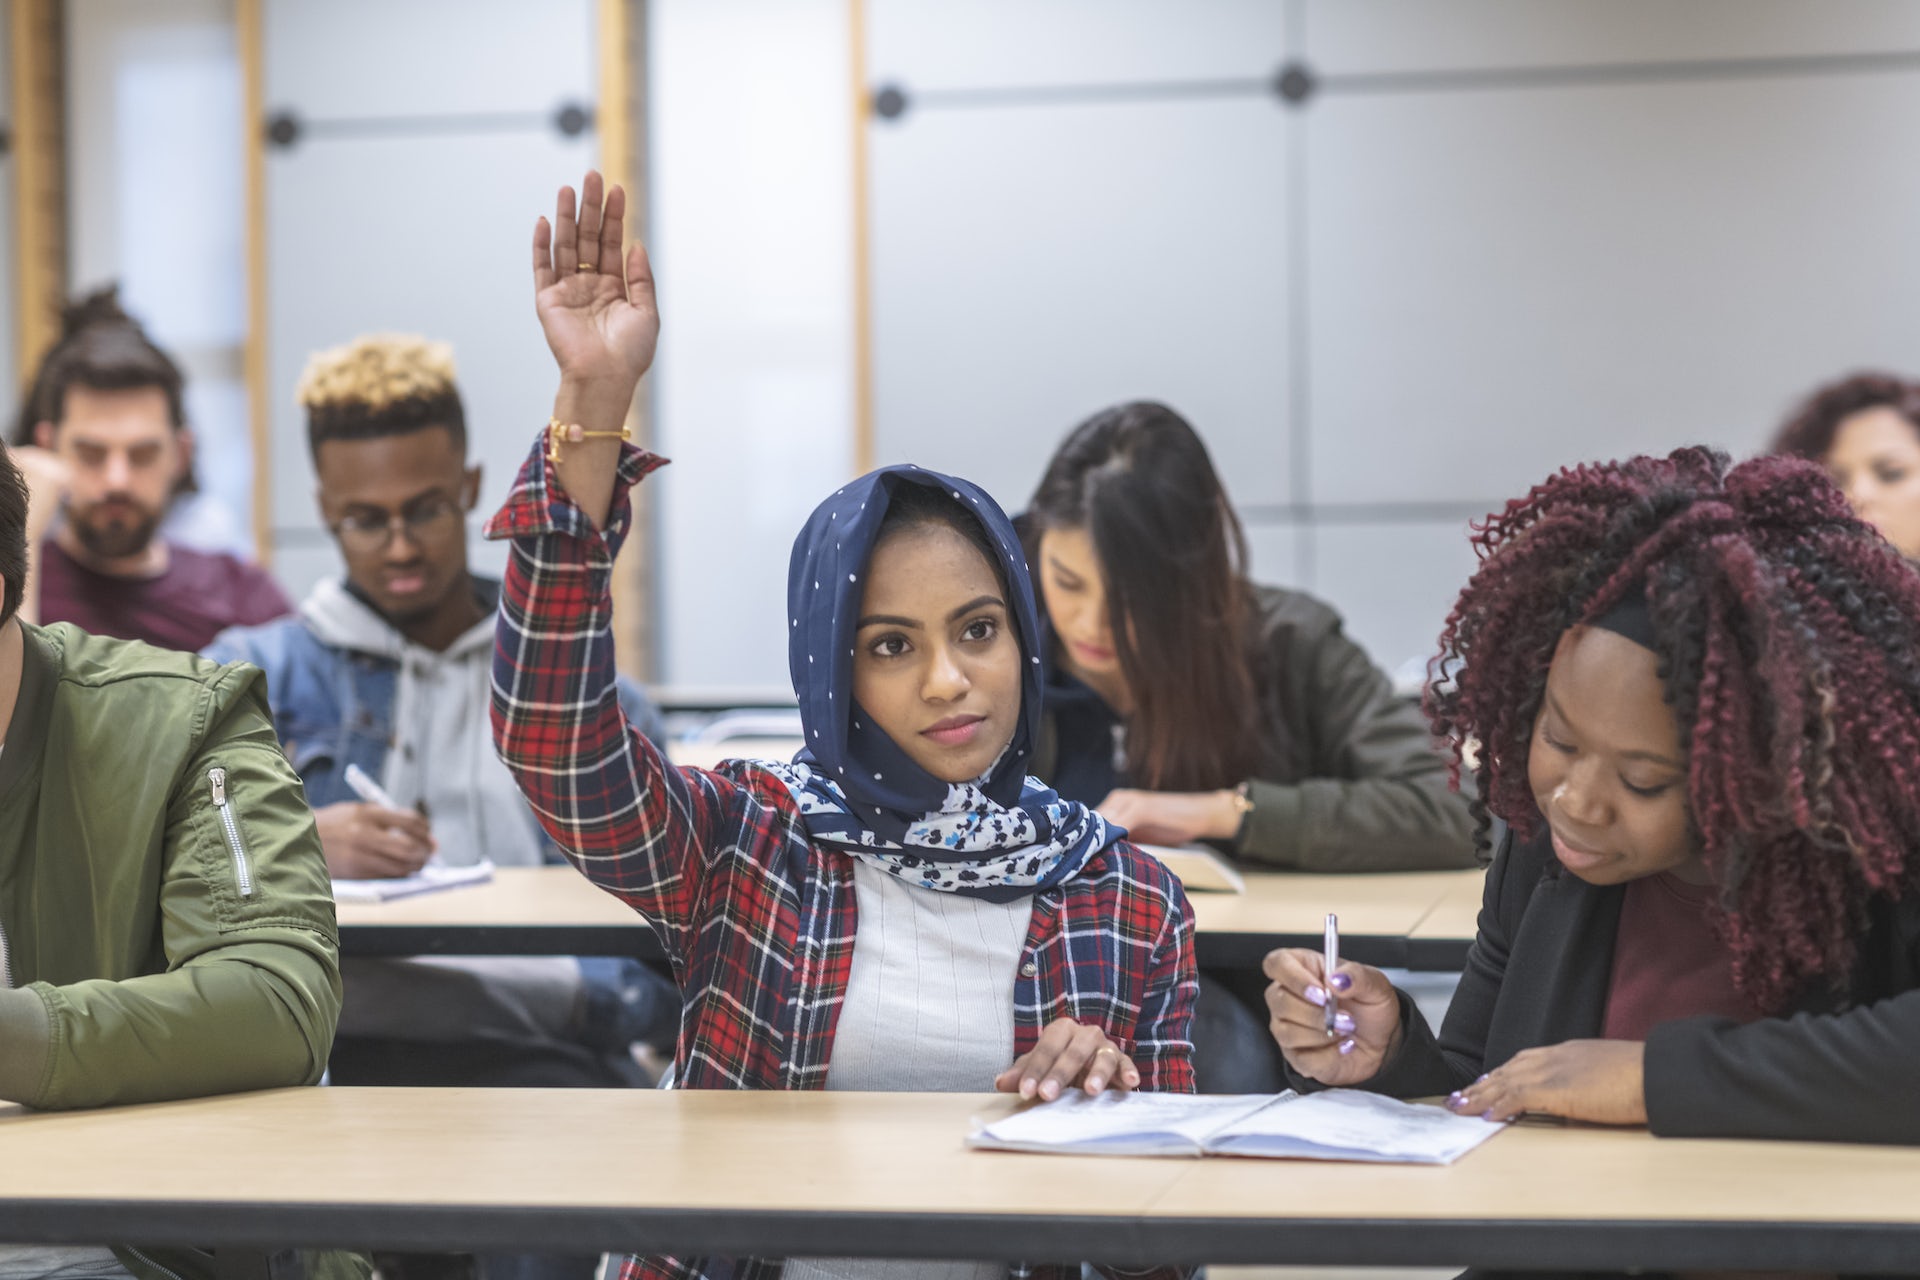 A person in a classroom wearing a hijab raises their hand. asylum-seekers